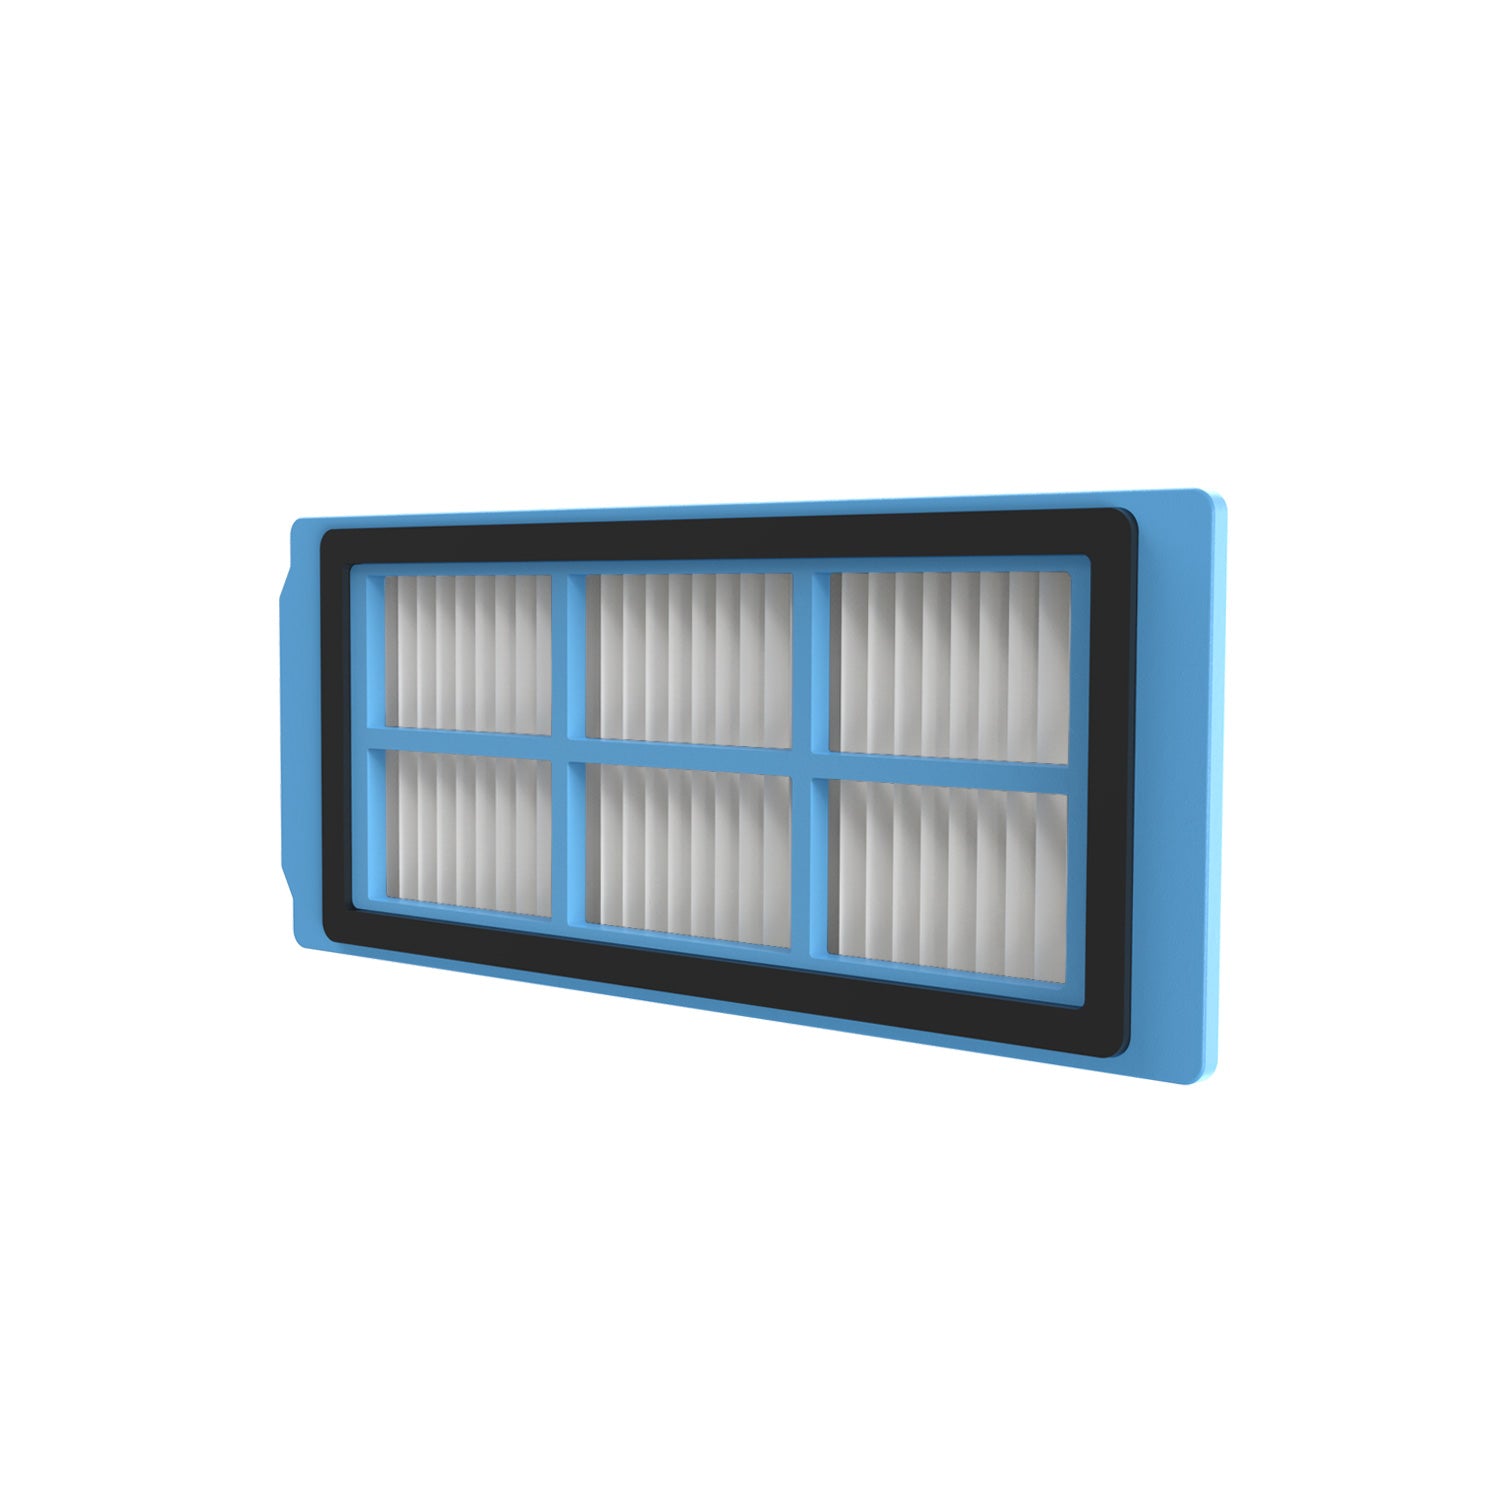 Thamtu G11 Replacement Filter Kits, 1 Filters and 1 Sponges Included